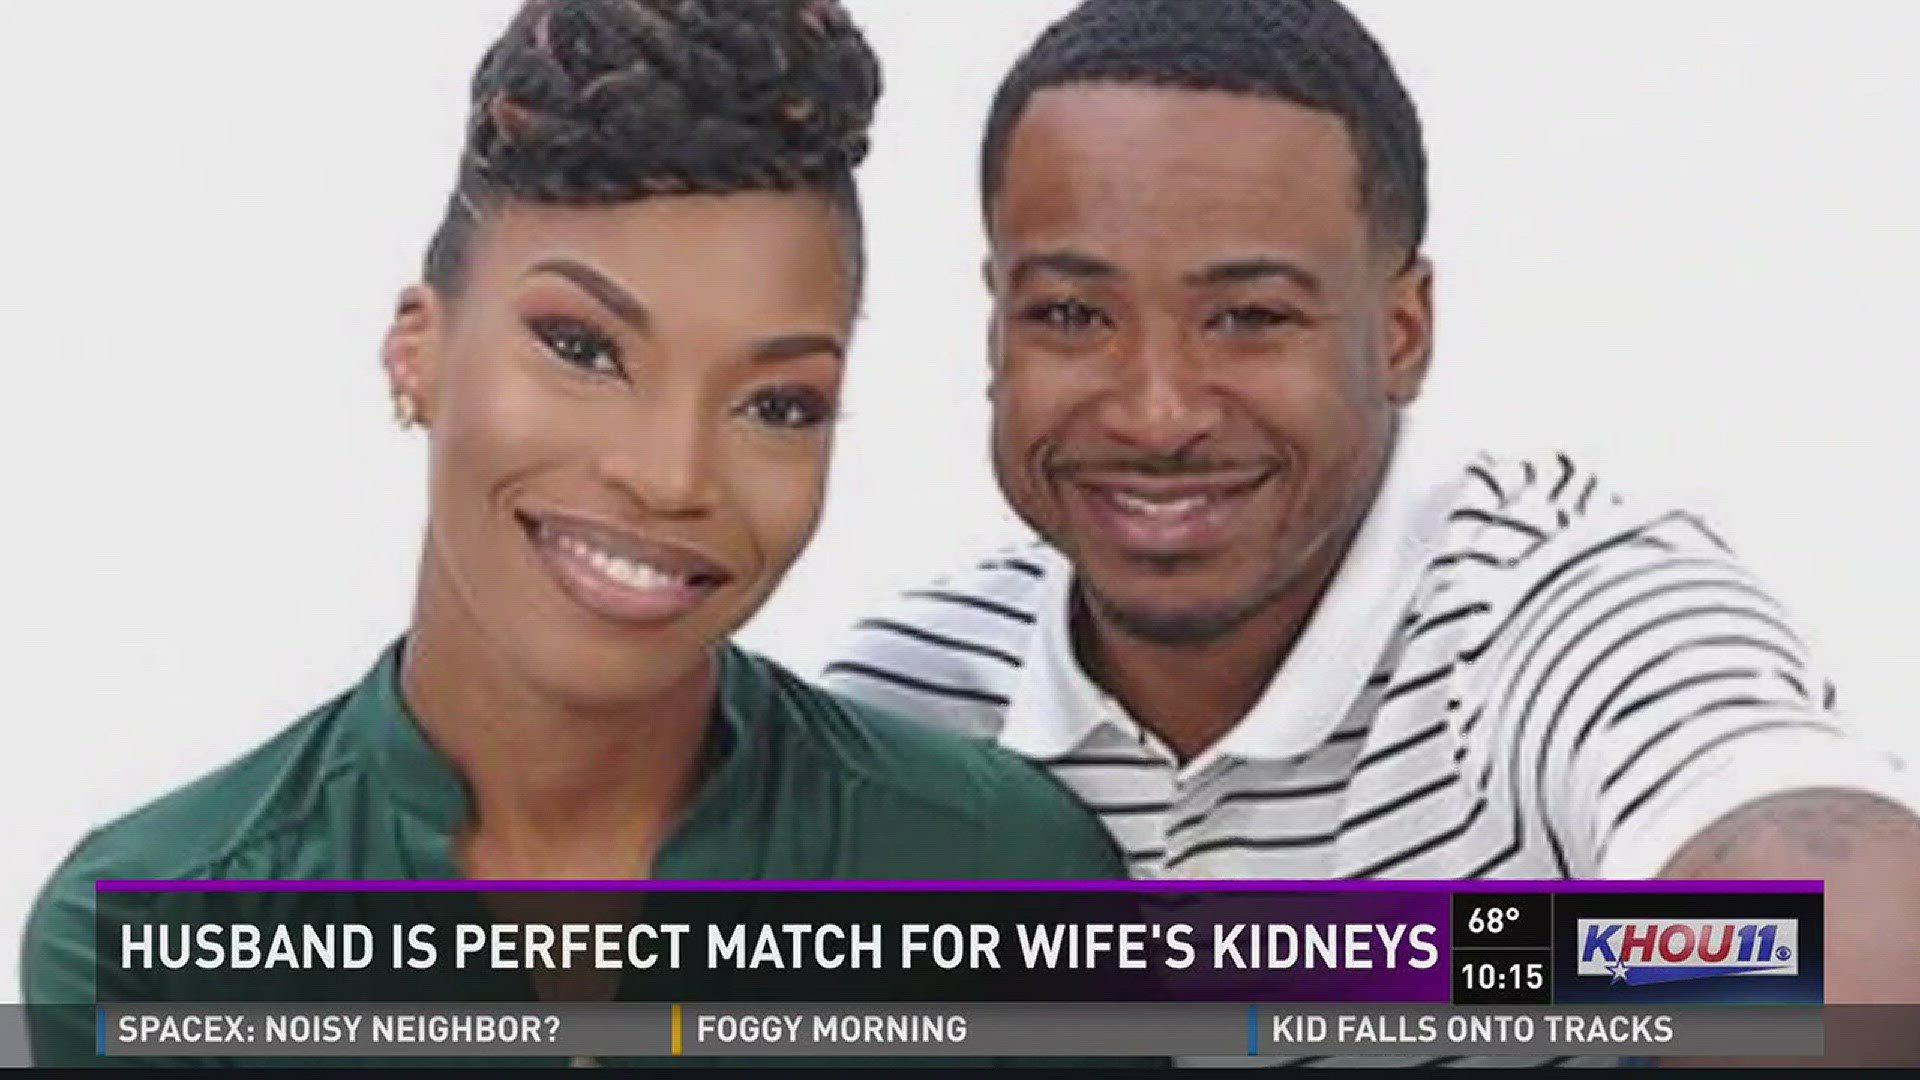 It would take five to seven years for his wife to maybe get a new kidney. He refused to wait.